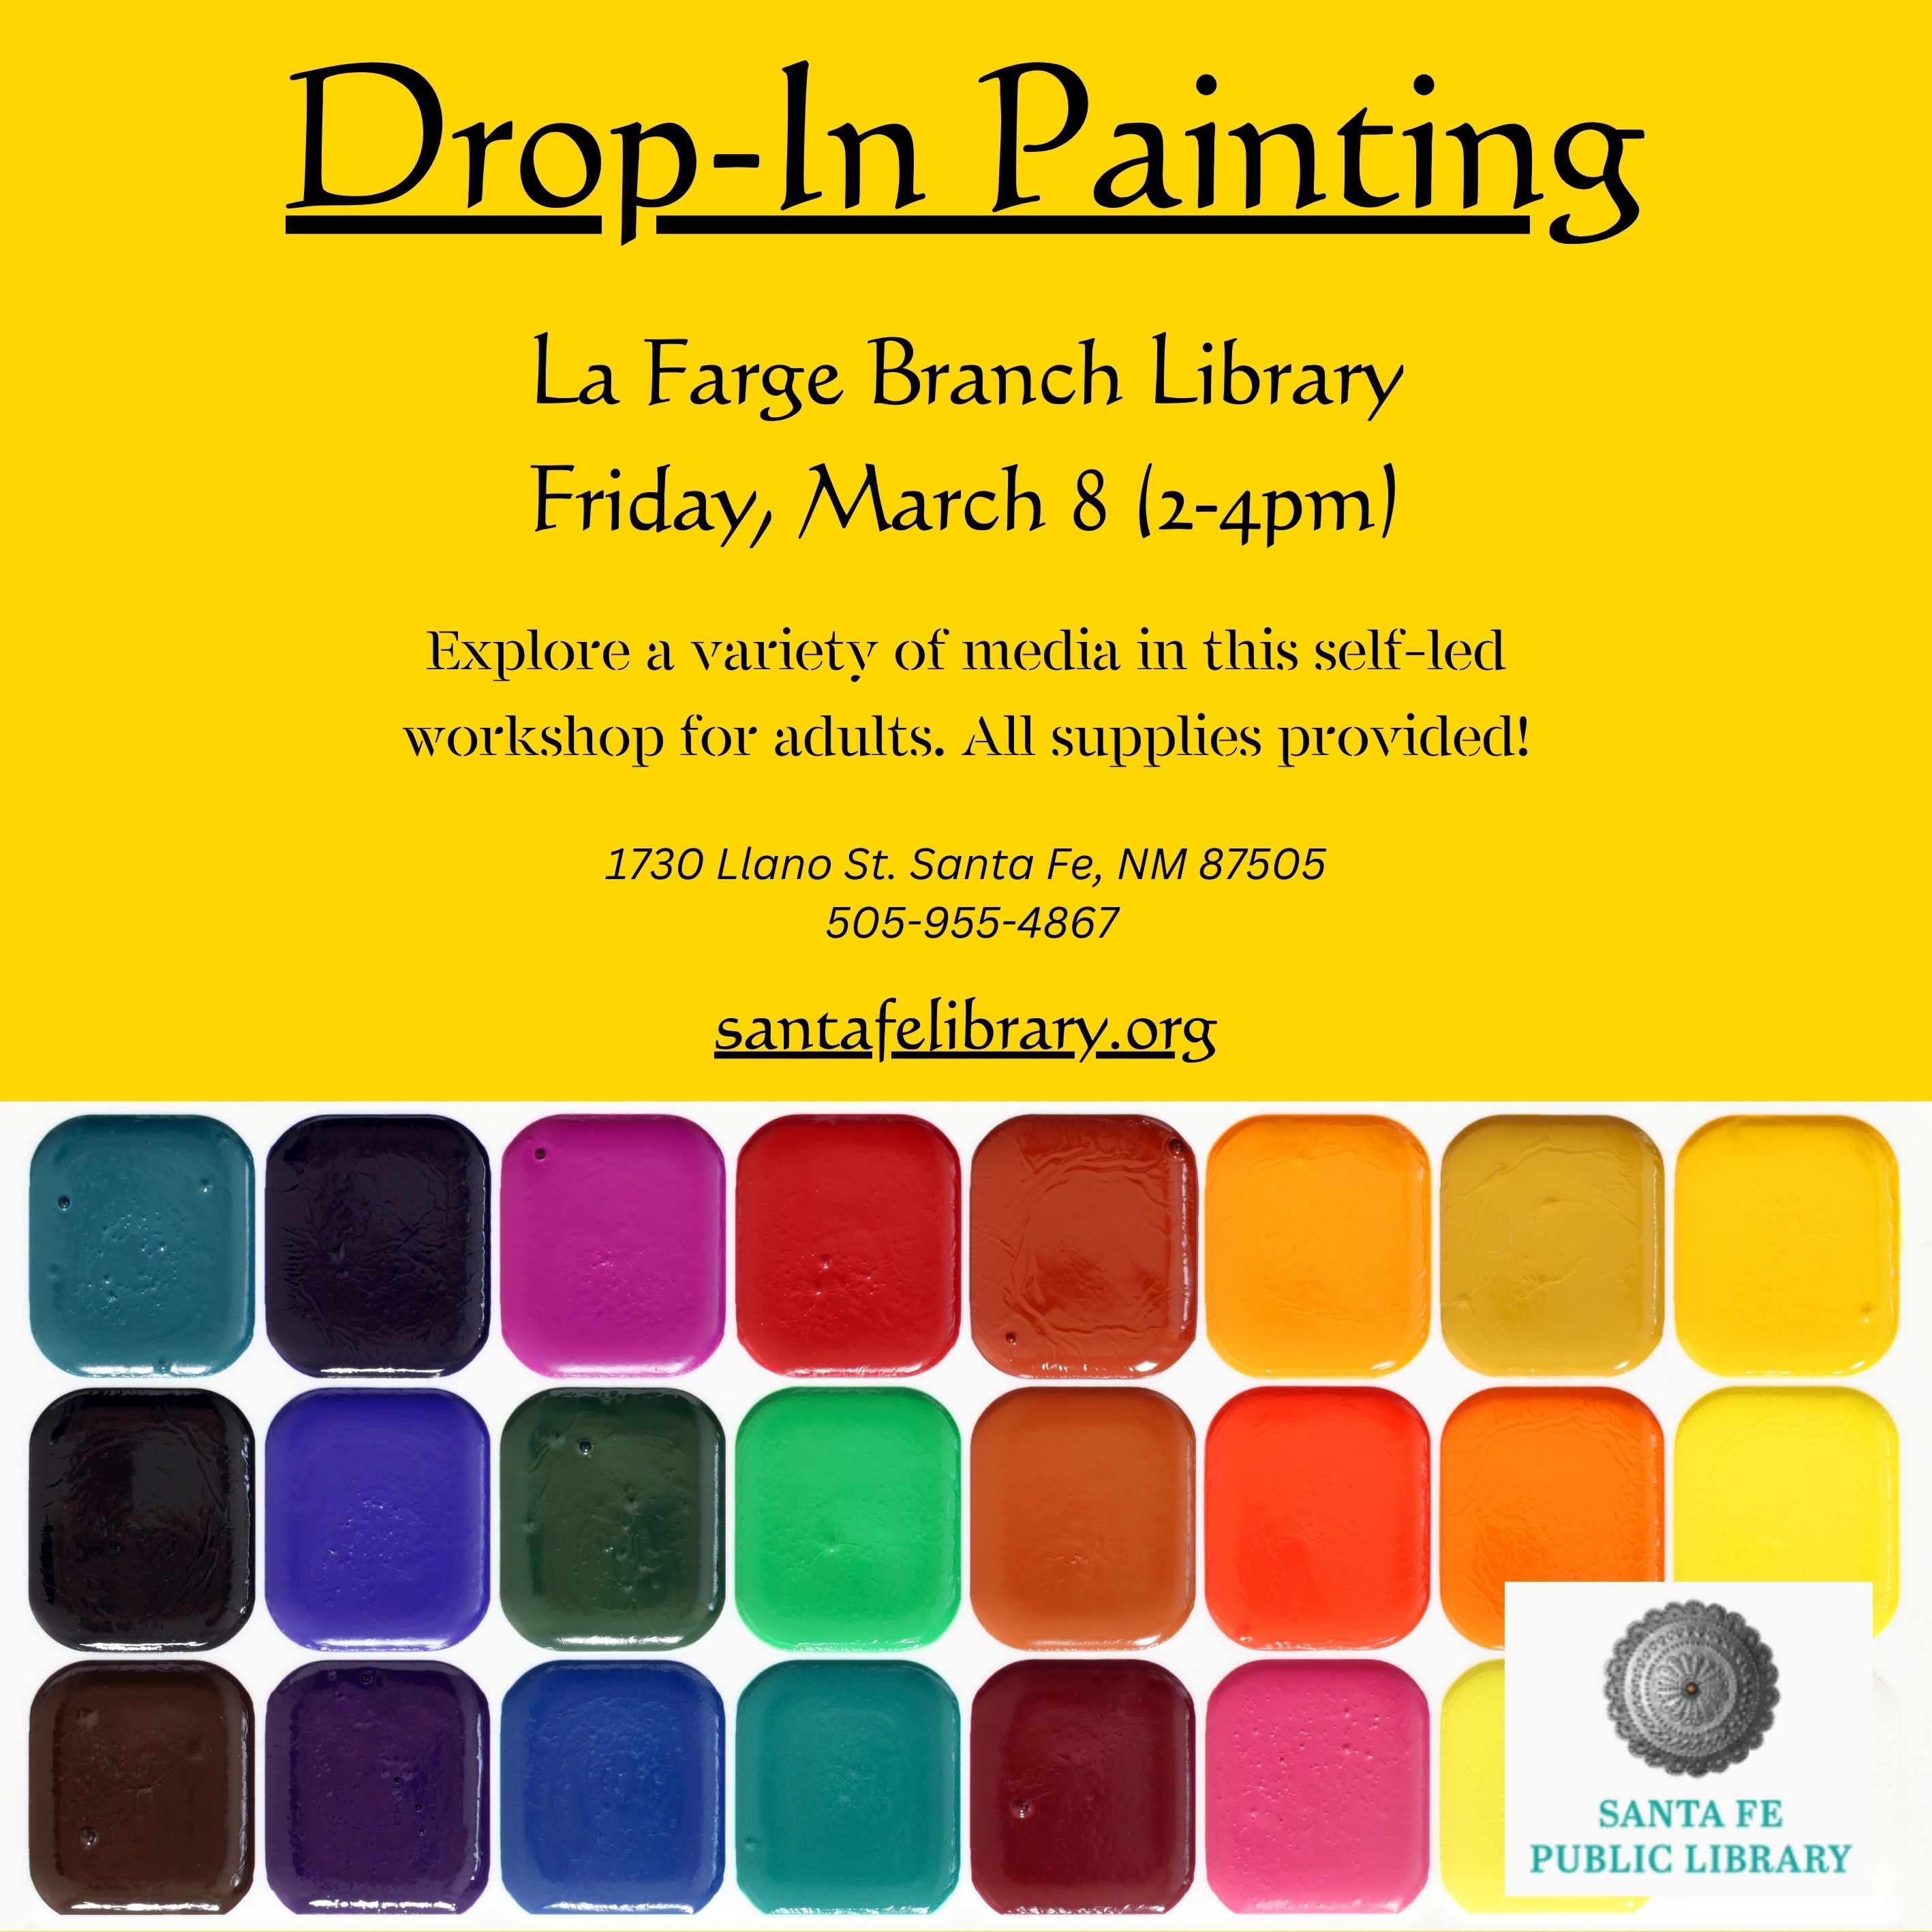 Drop-in Painting 